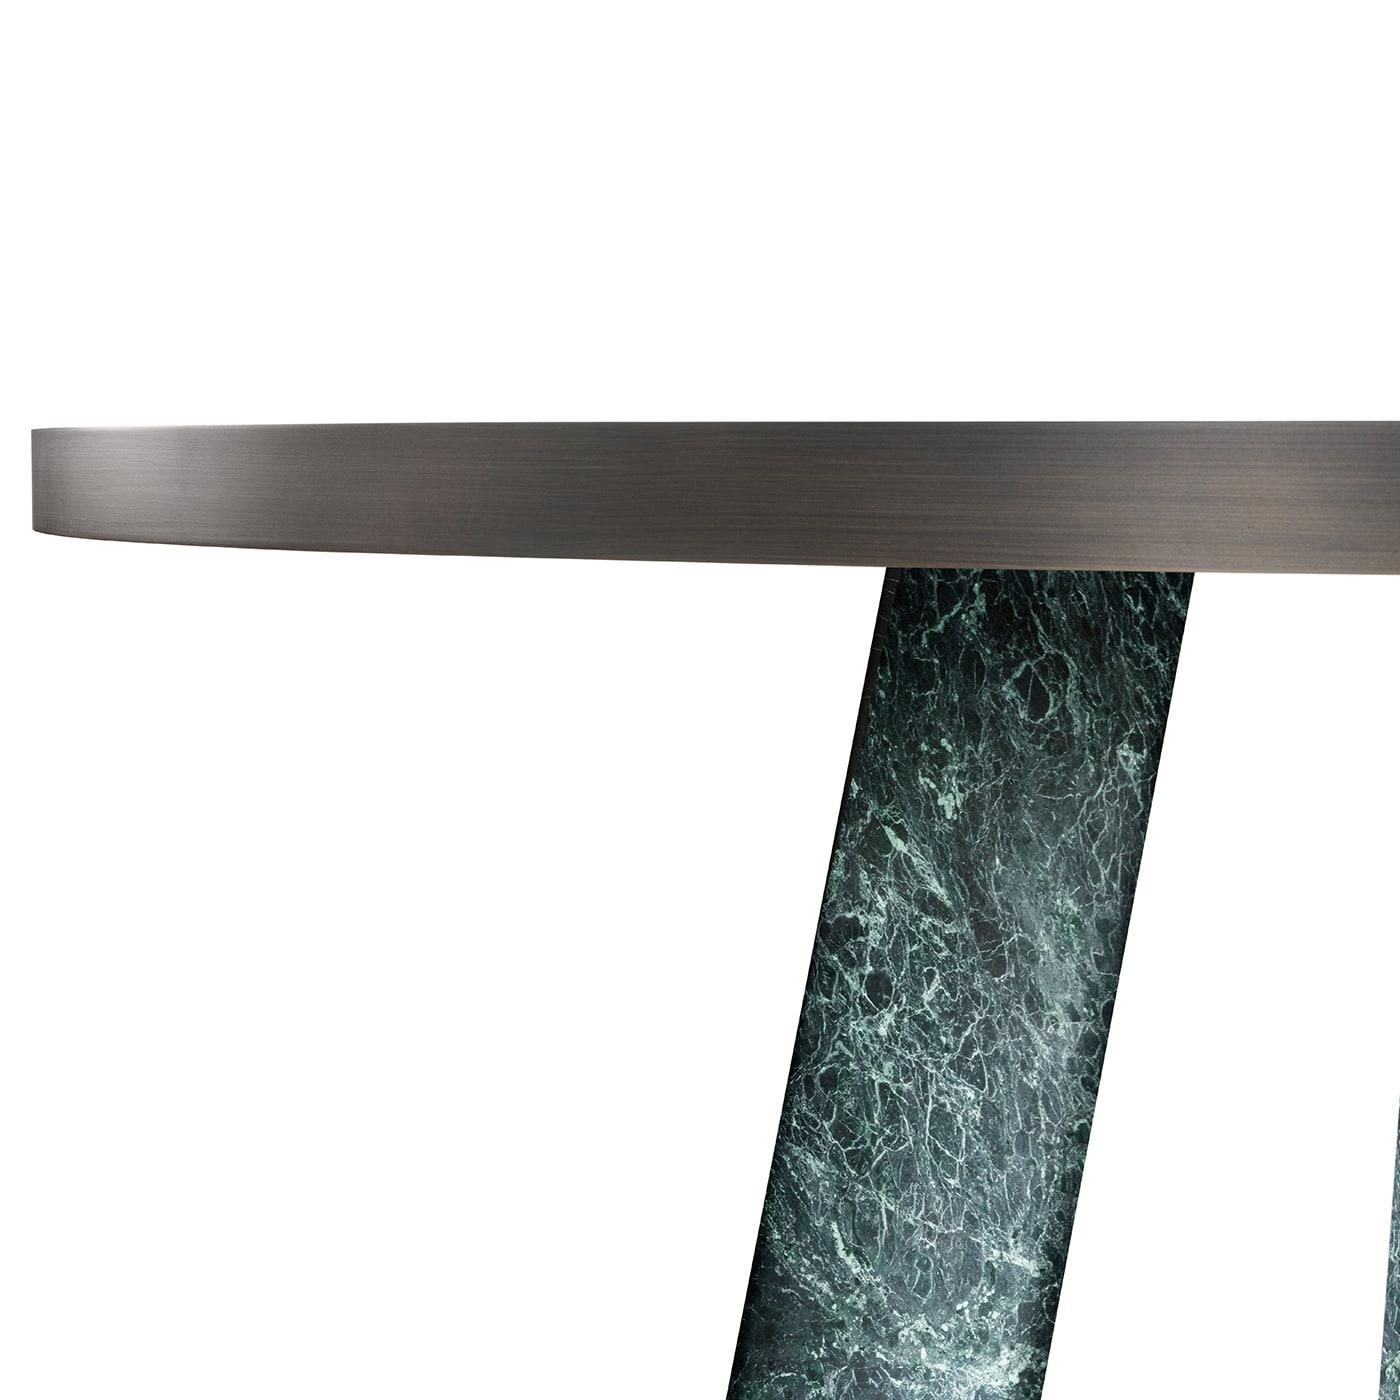 This exquisite dining table is an exercise in bold geometric volumes, their clean aesthetic functional to emphasize the beauty of Verde Alpi marble. The natural stone is seductive in its unpredictable tracery and shades that make each table entirely